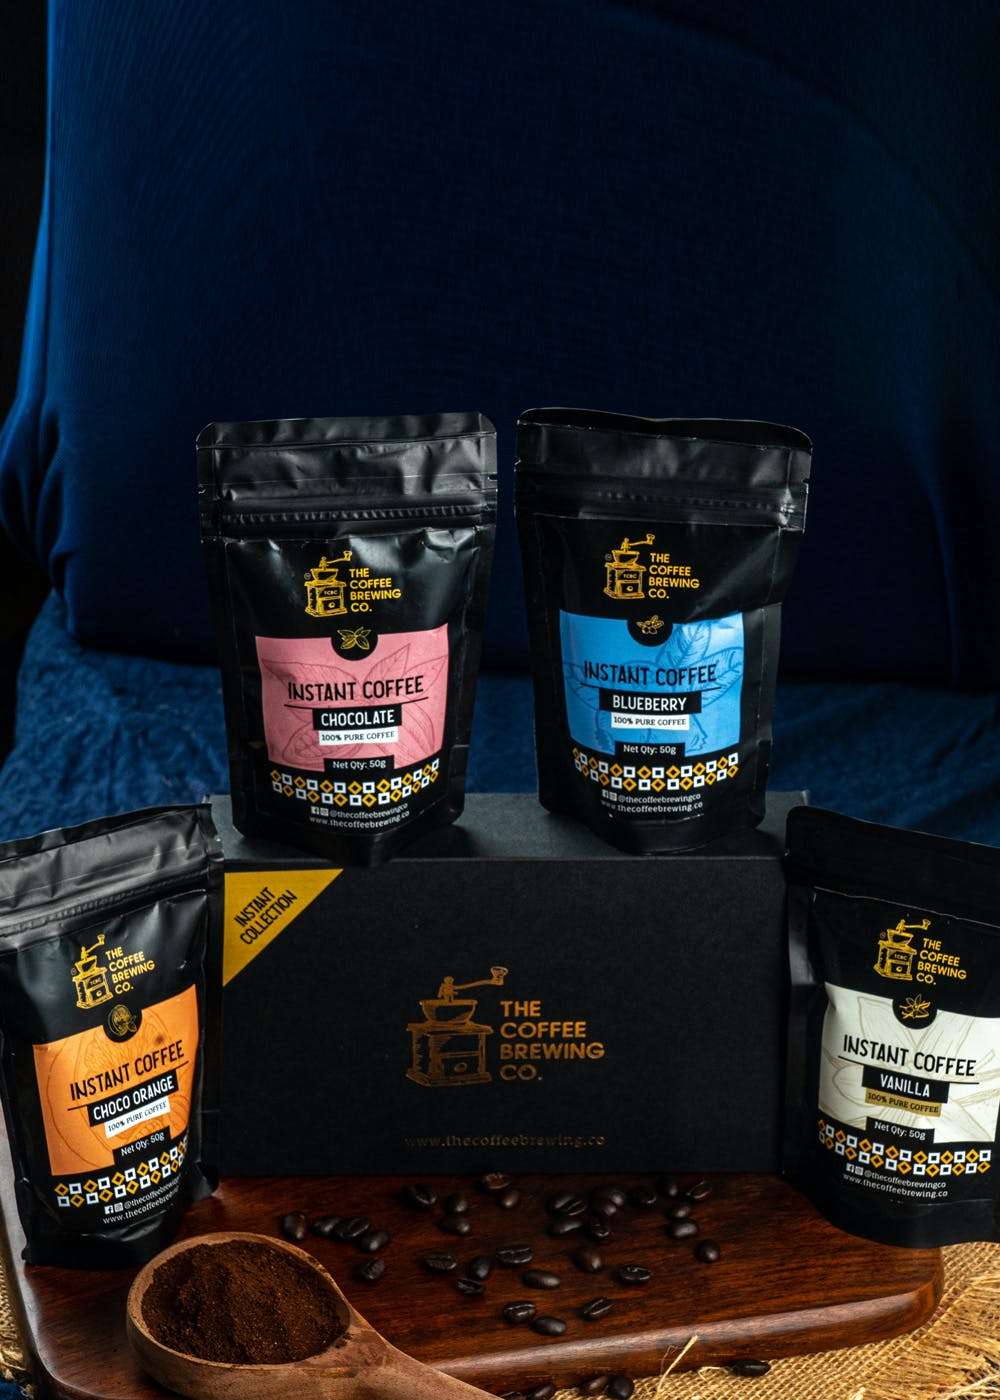 Buy Coffee Online From The Coffee Brewing Co.I LBB